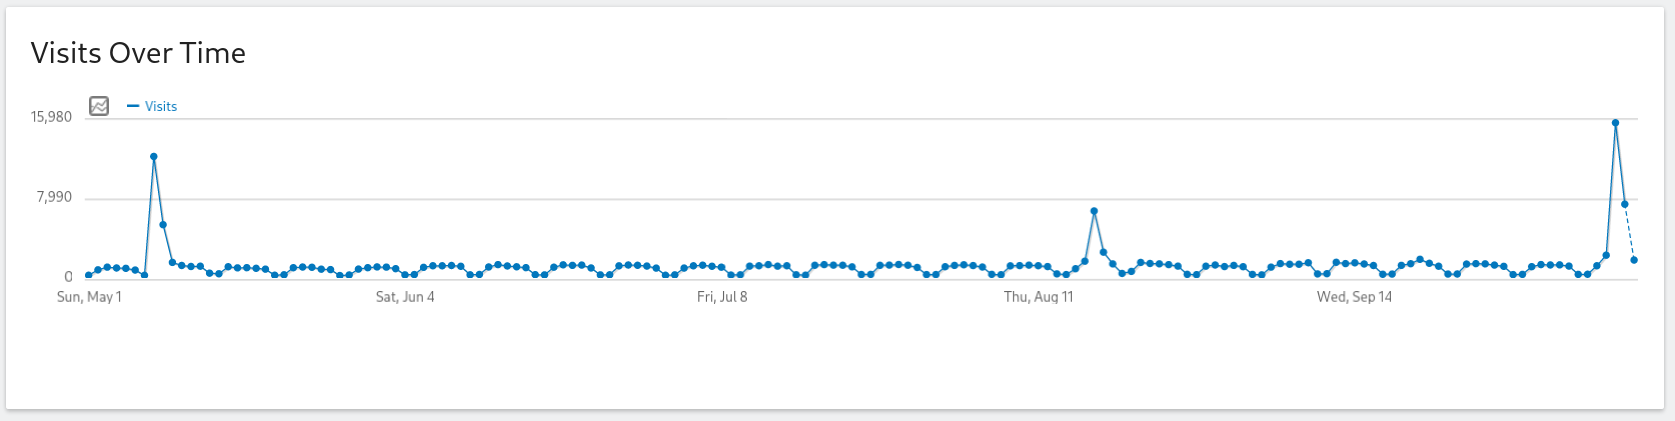 A "visits over time" view from Jamie's analytics, which shows a view from May 1st to October 14th, with three key spikes alongside the consistent traffic. On a weekday, we can see an average of 1200 views per day, and 400 views on a weekend. On the 8th May, we can see a spike of 12140 views. On the 17th August, we can see a spike of 6697 views. On the 12th October we can see a spike of 15507 views, and on the 13th October we can see a spike of 7373 views